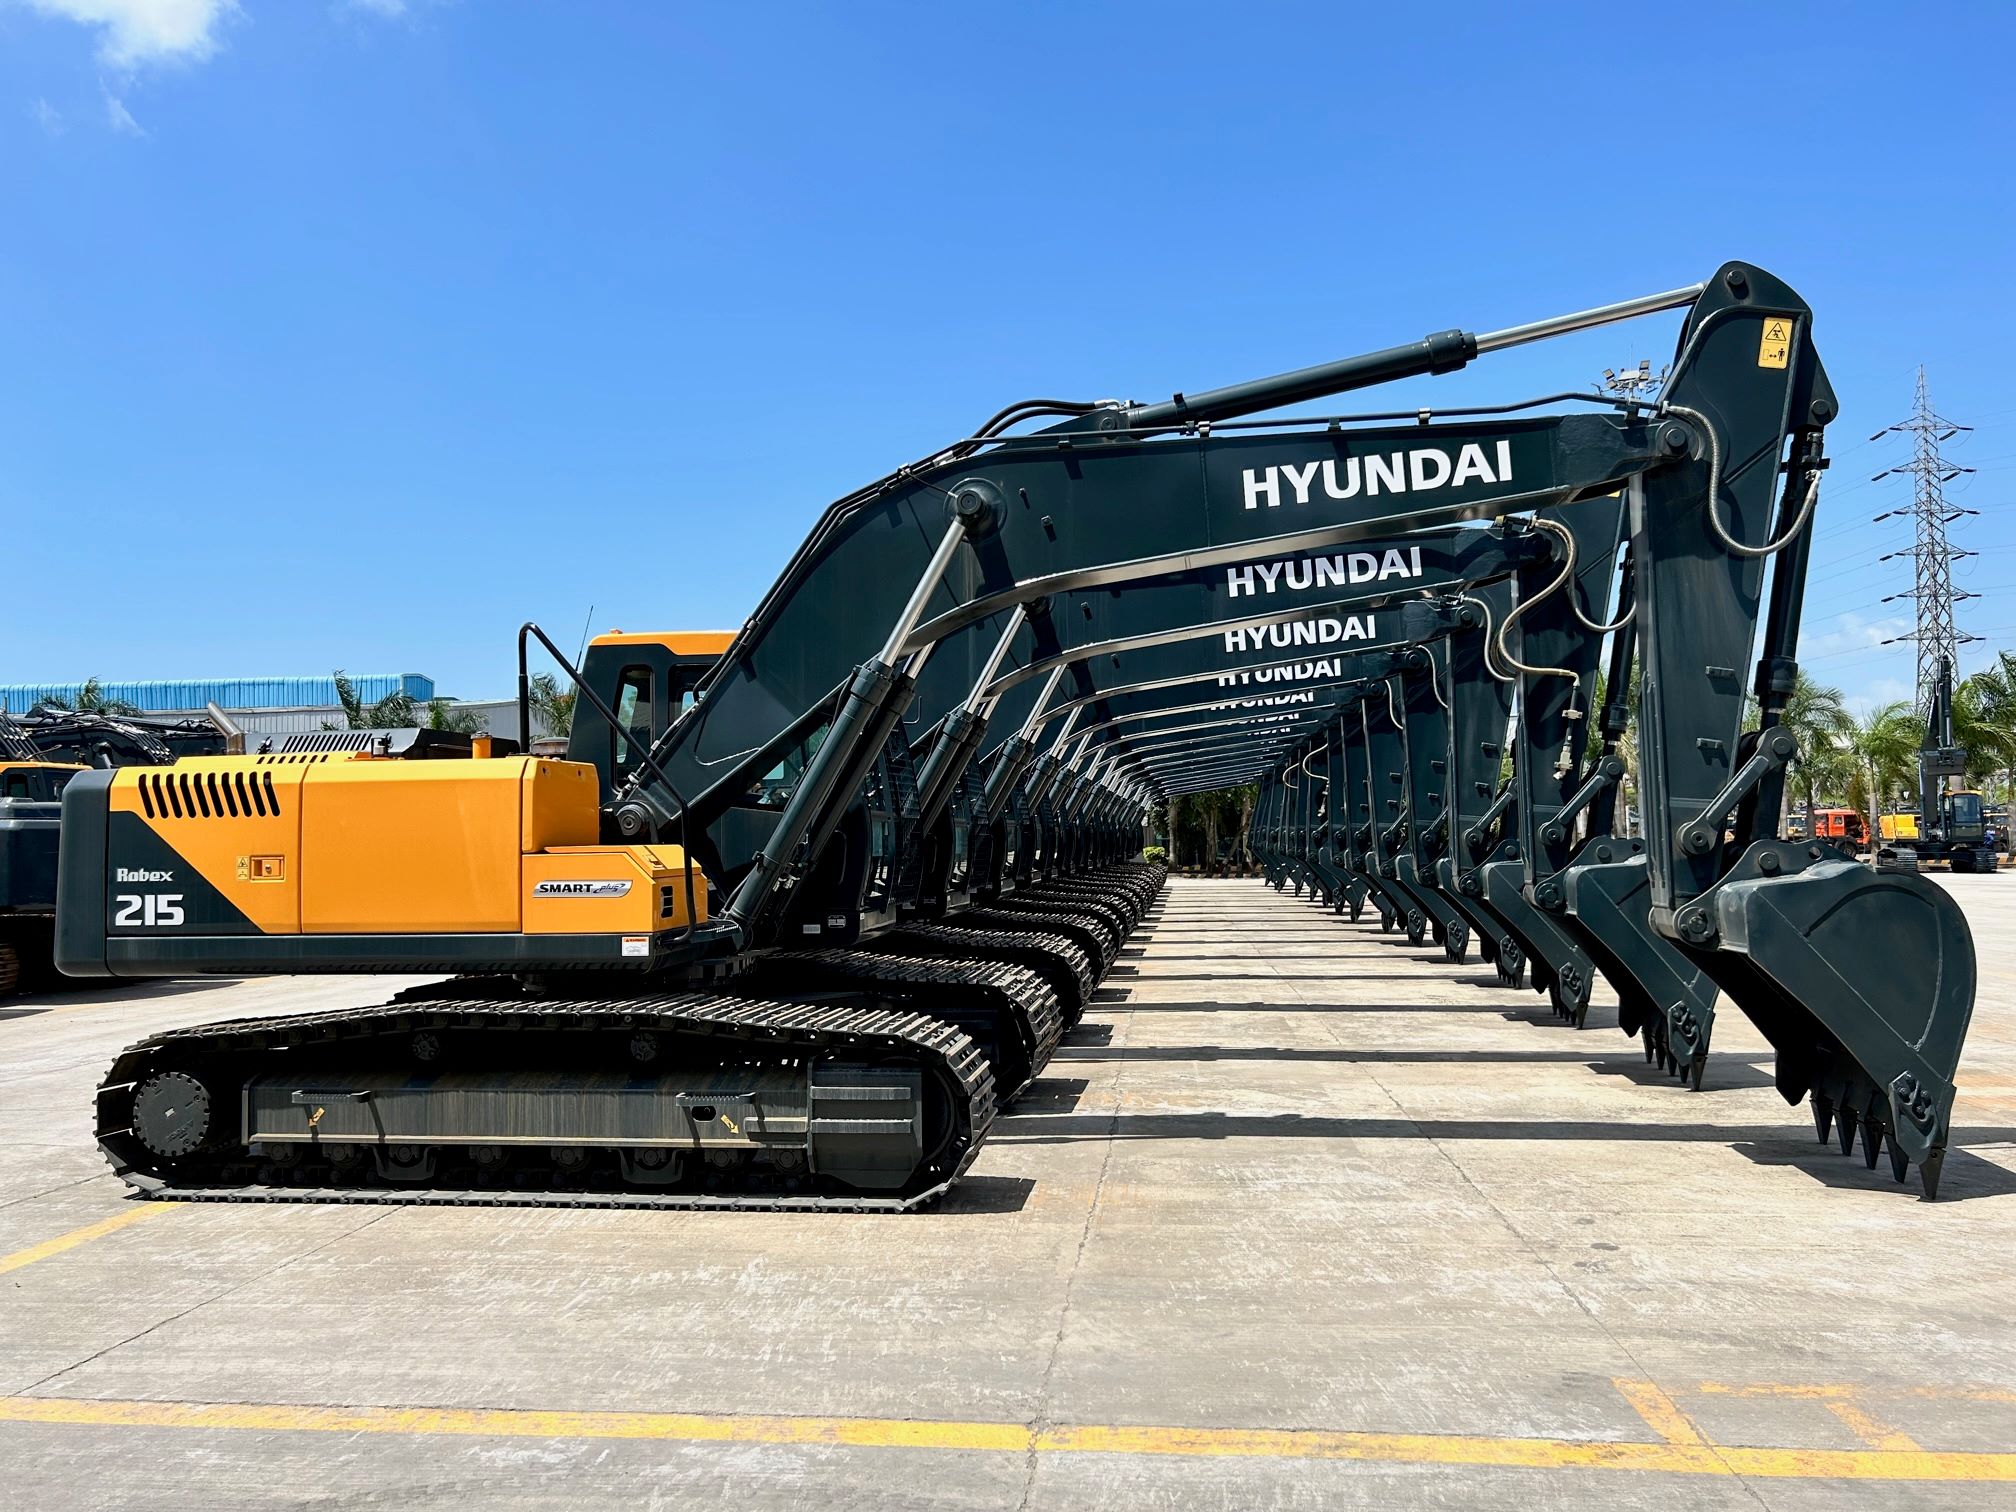 The new Hyundai R215 series is said to be an exciting addition to HPE Africa’s earthmoving portfolio.